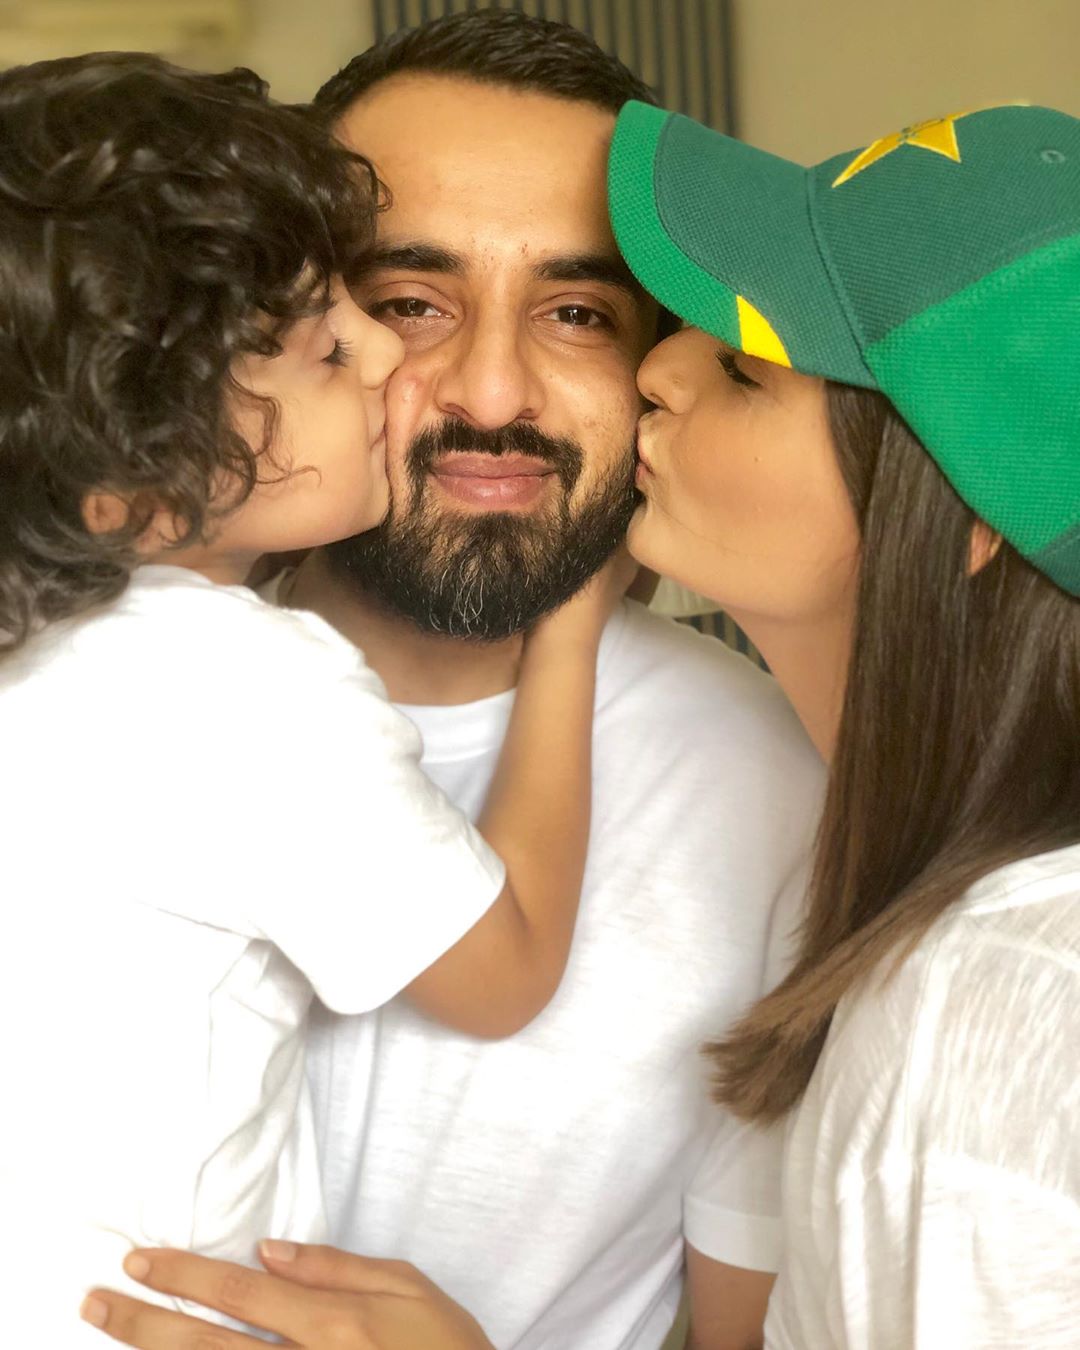 Latest Pictures of Momal Sheikh with her Husband and Son